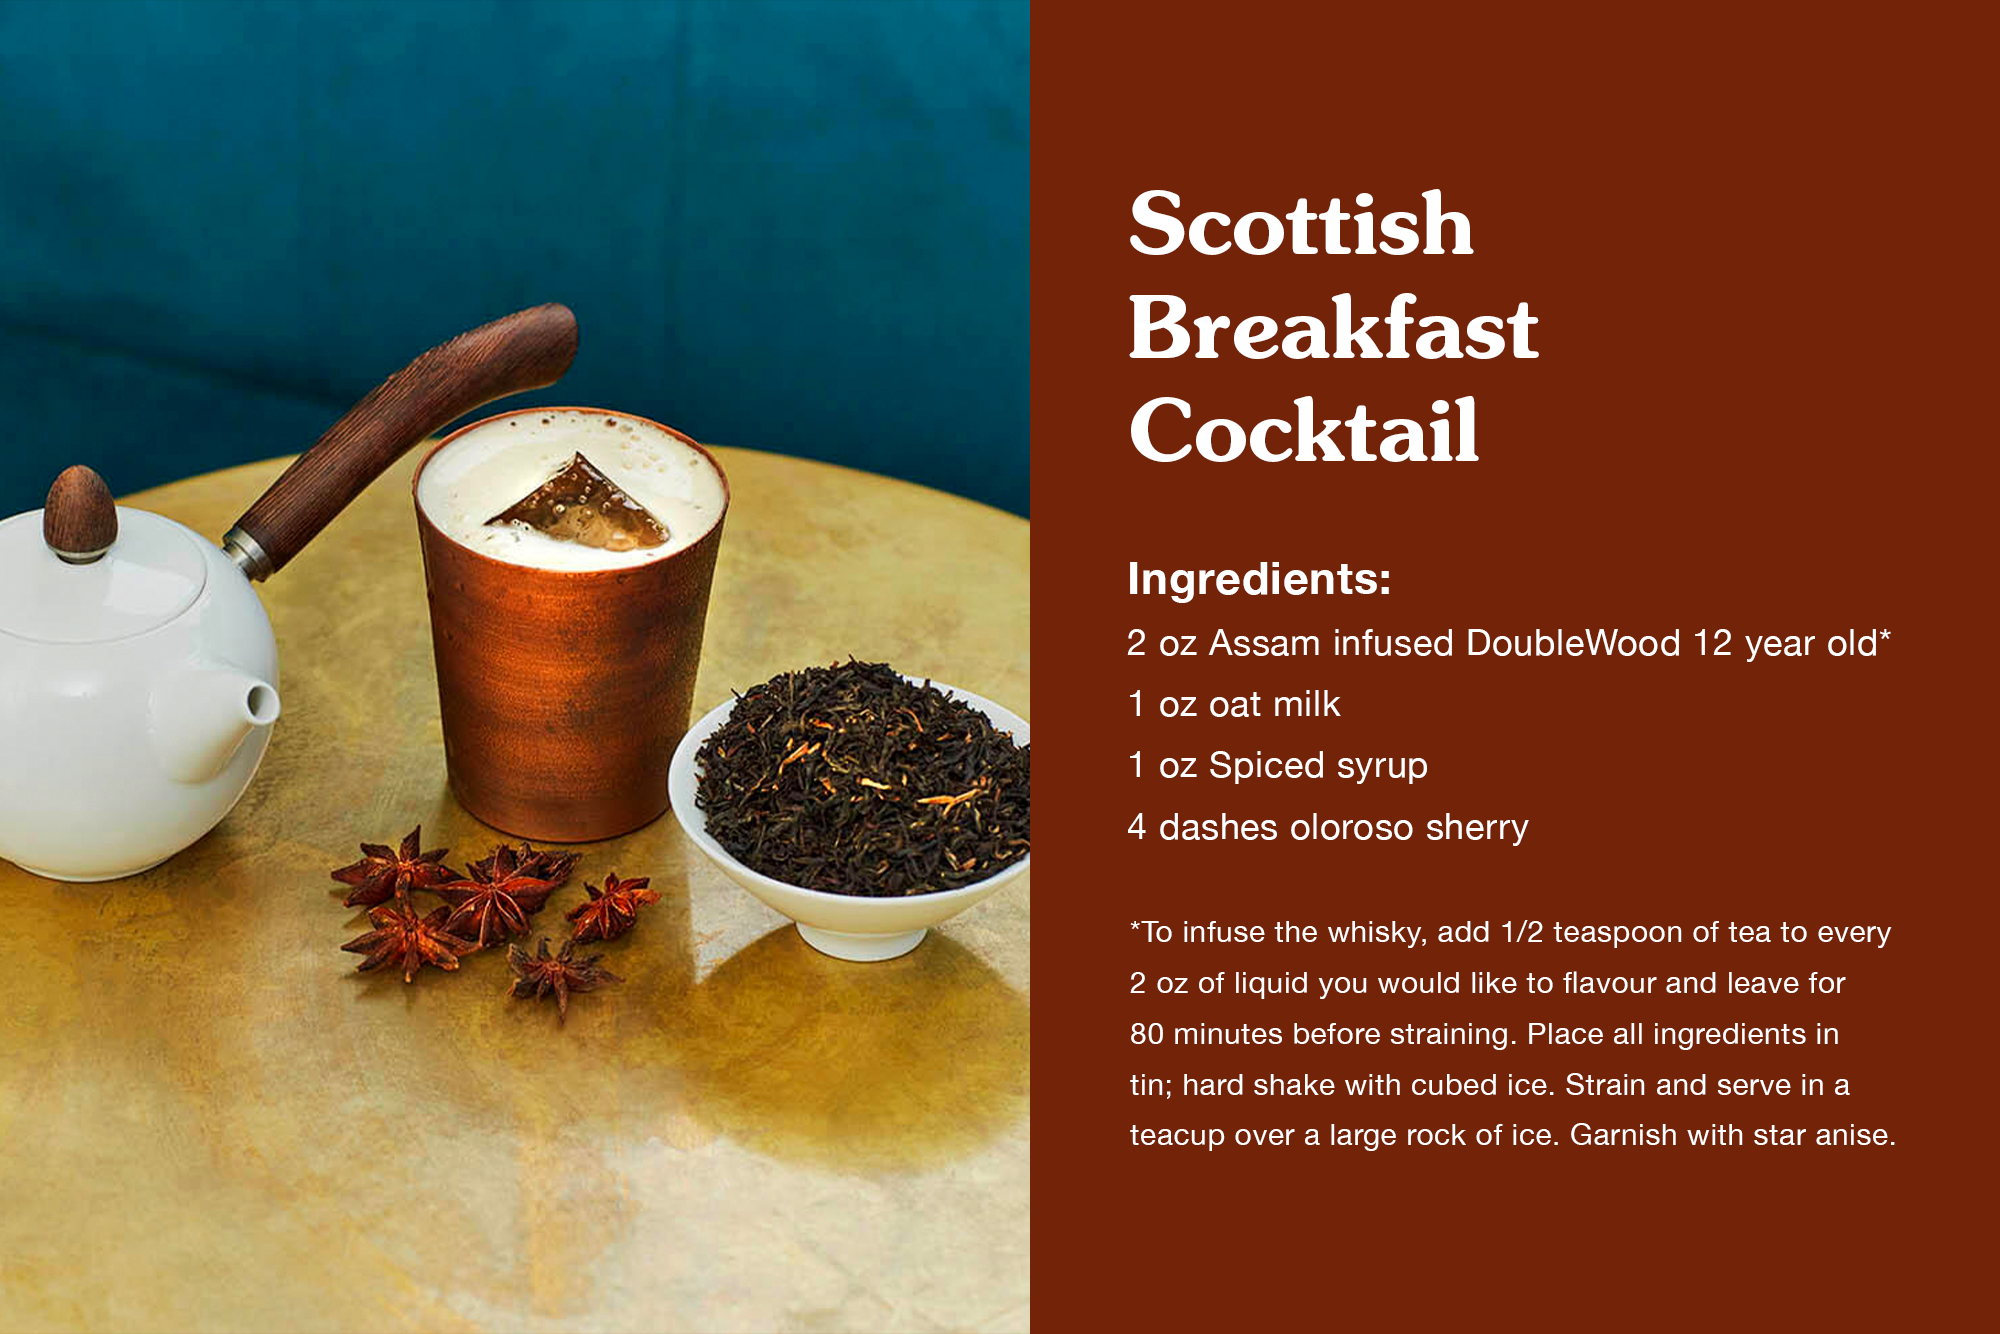 Scottish Breakfast Cocktail 2oz Assam infused DoubleWood 12 year old* 1 oz oat milk 1 oz Spiced syrup 4 dashes oloroso sherry *To infuse the whisky, add 1/2 teaspoon of tea to every 2 oz of liquid you would like to flavour and leave for 80 minutes before straining. Place all ingredients in tin; hard shake with cubed ice. Strain and serve in a teacup over a large rock of ice. Garnish with star anise.